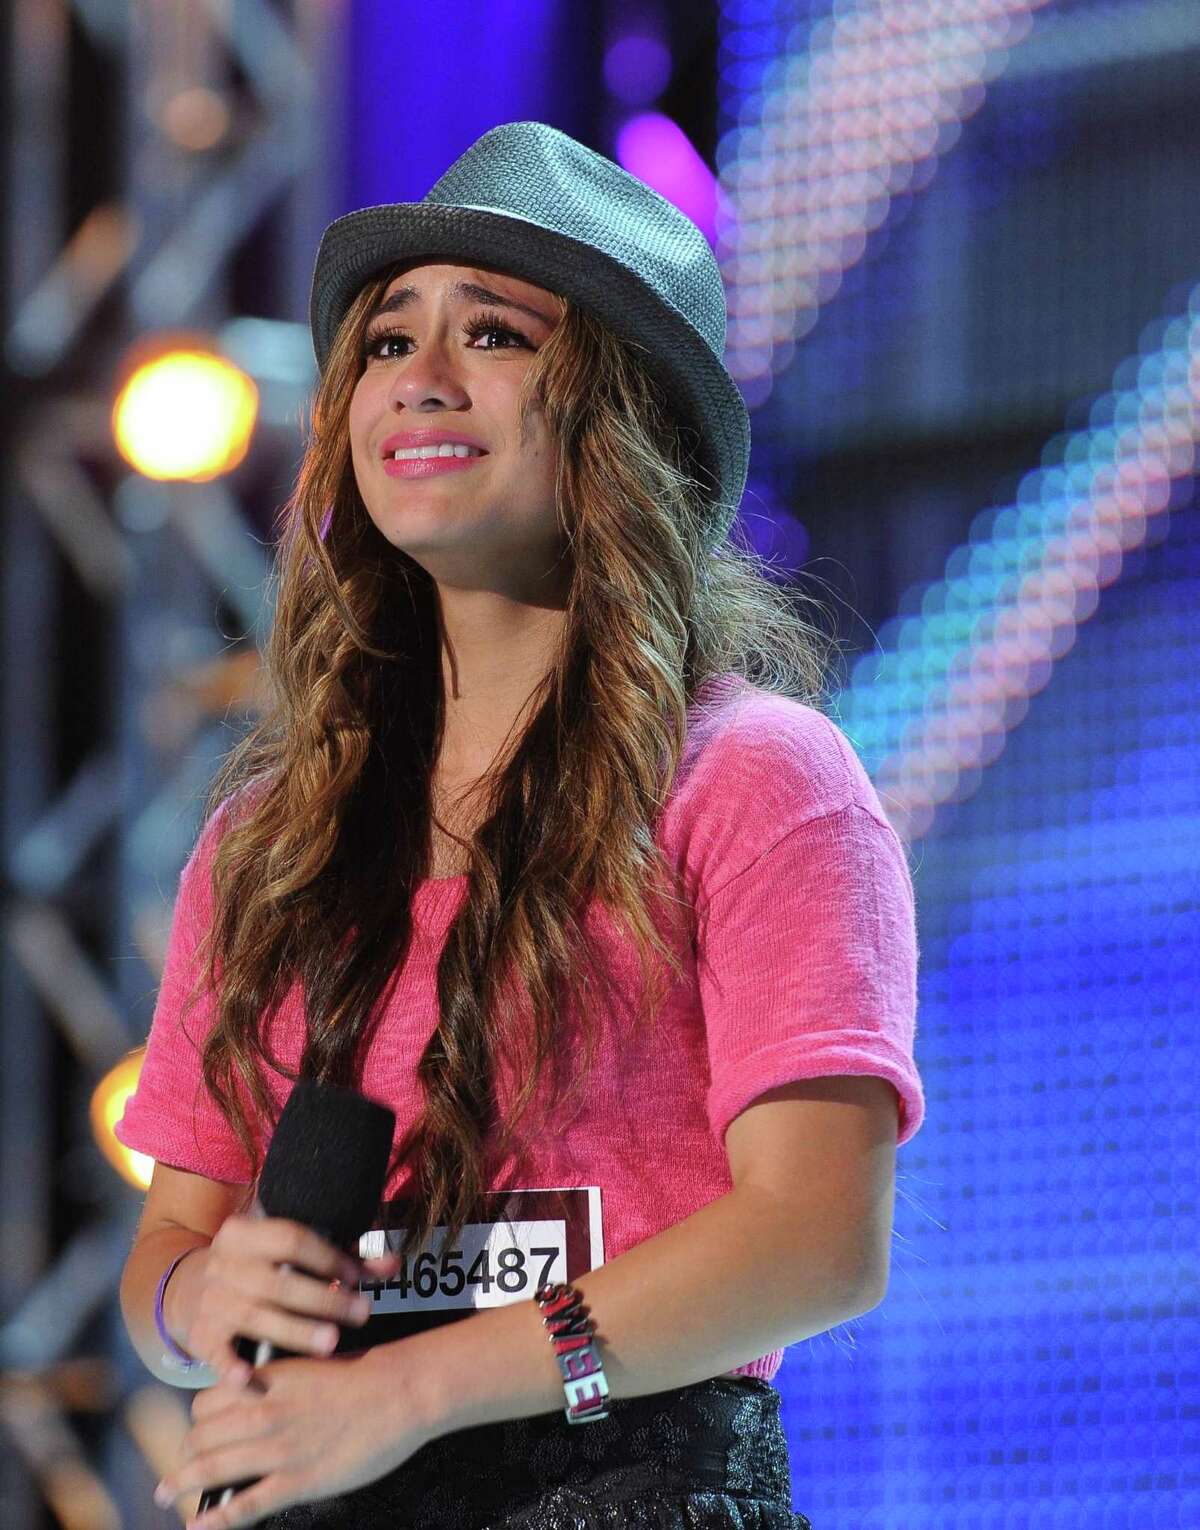 Ally Brooke made her first splash when she tried out for “The X Factor” when the talent competition held auditions in Austin in 2012.